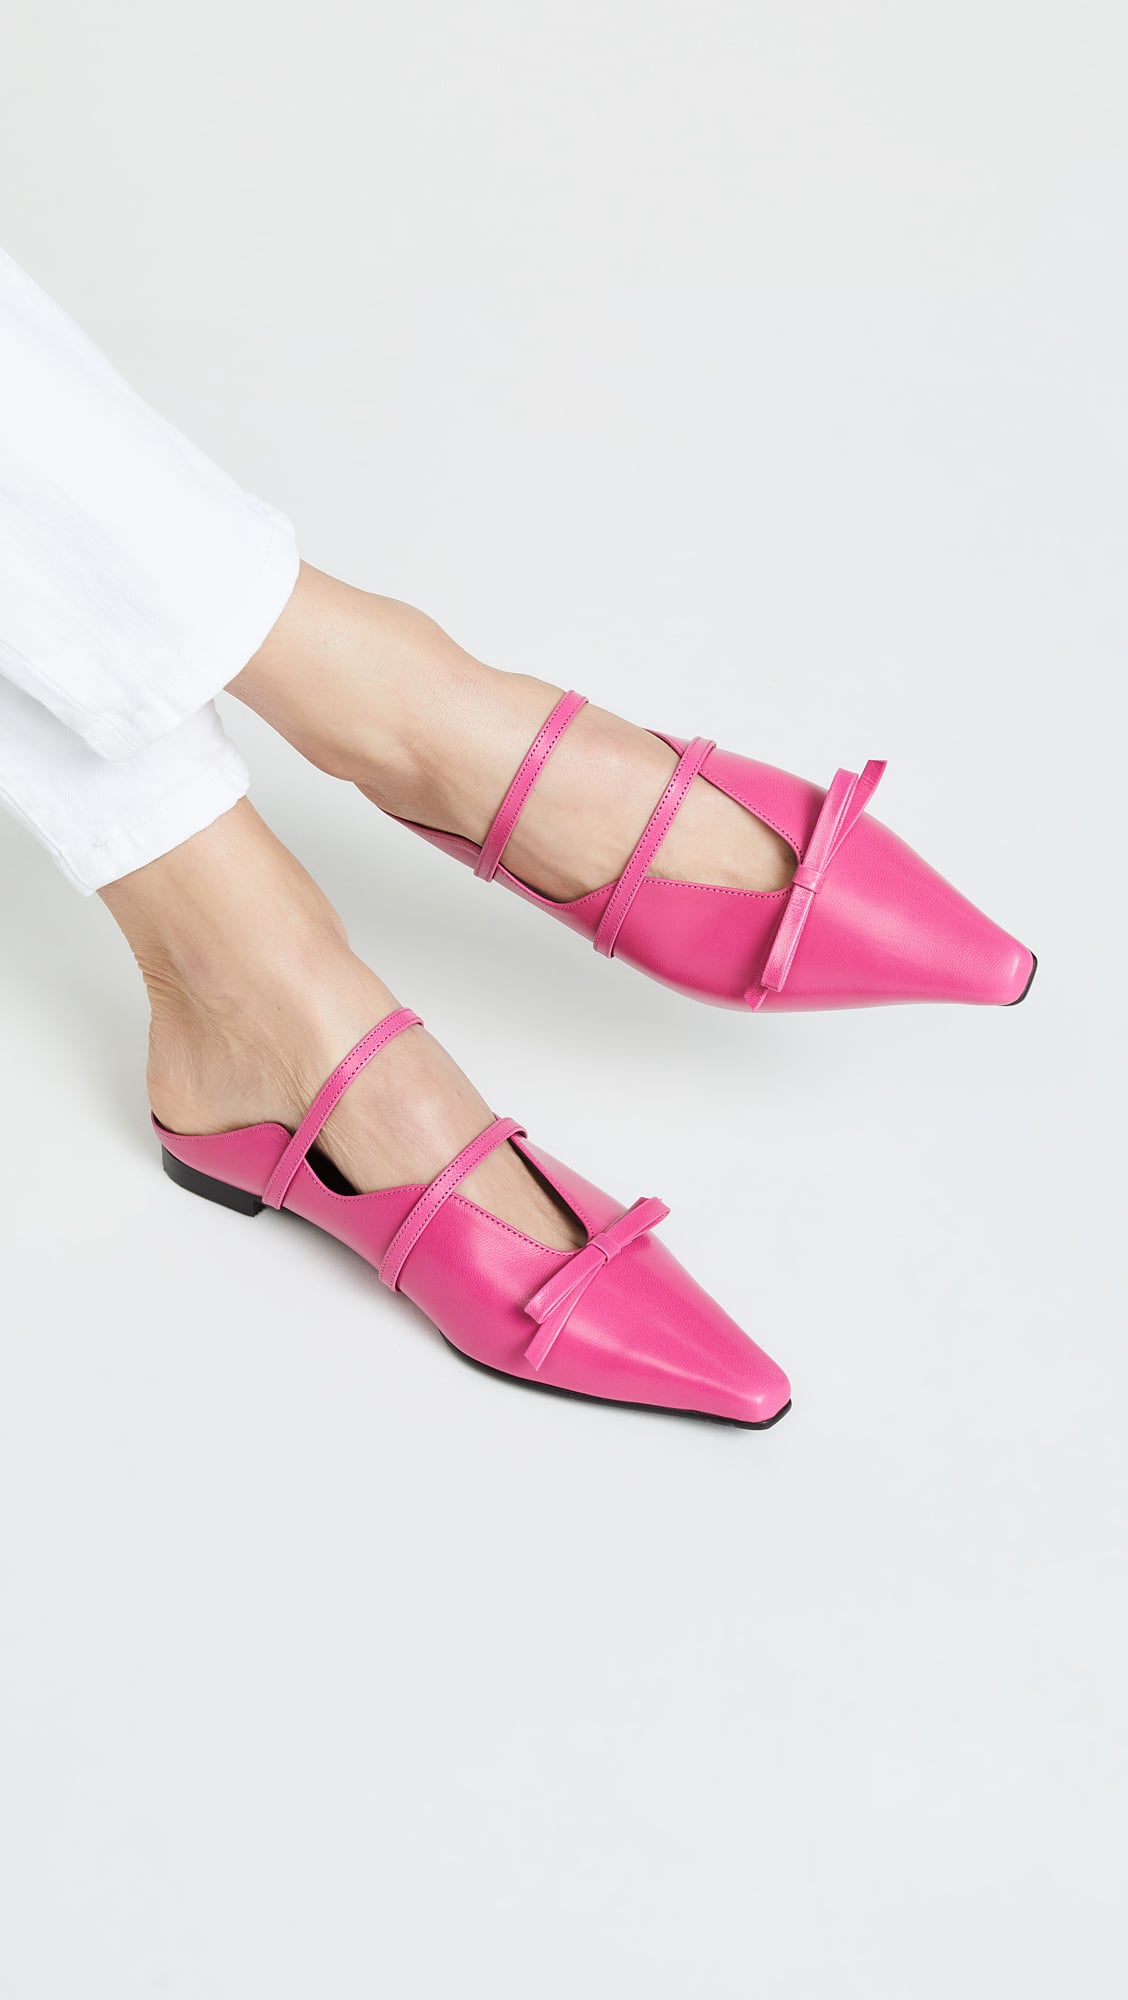 flat shoes trend 2019